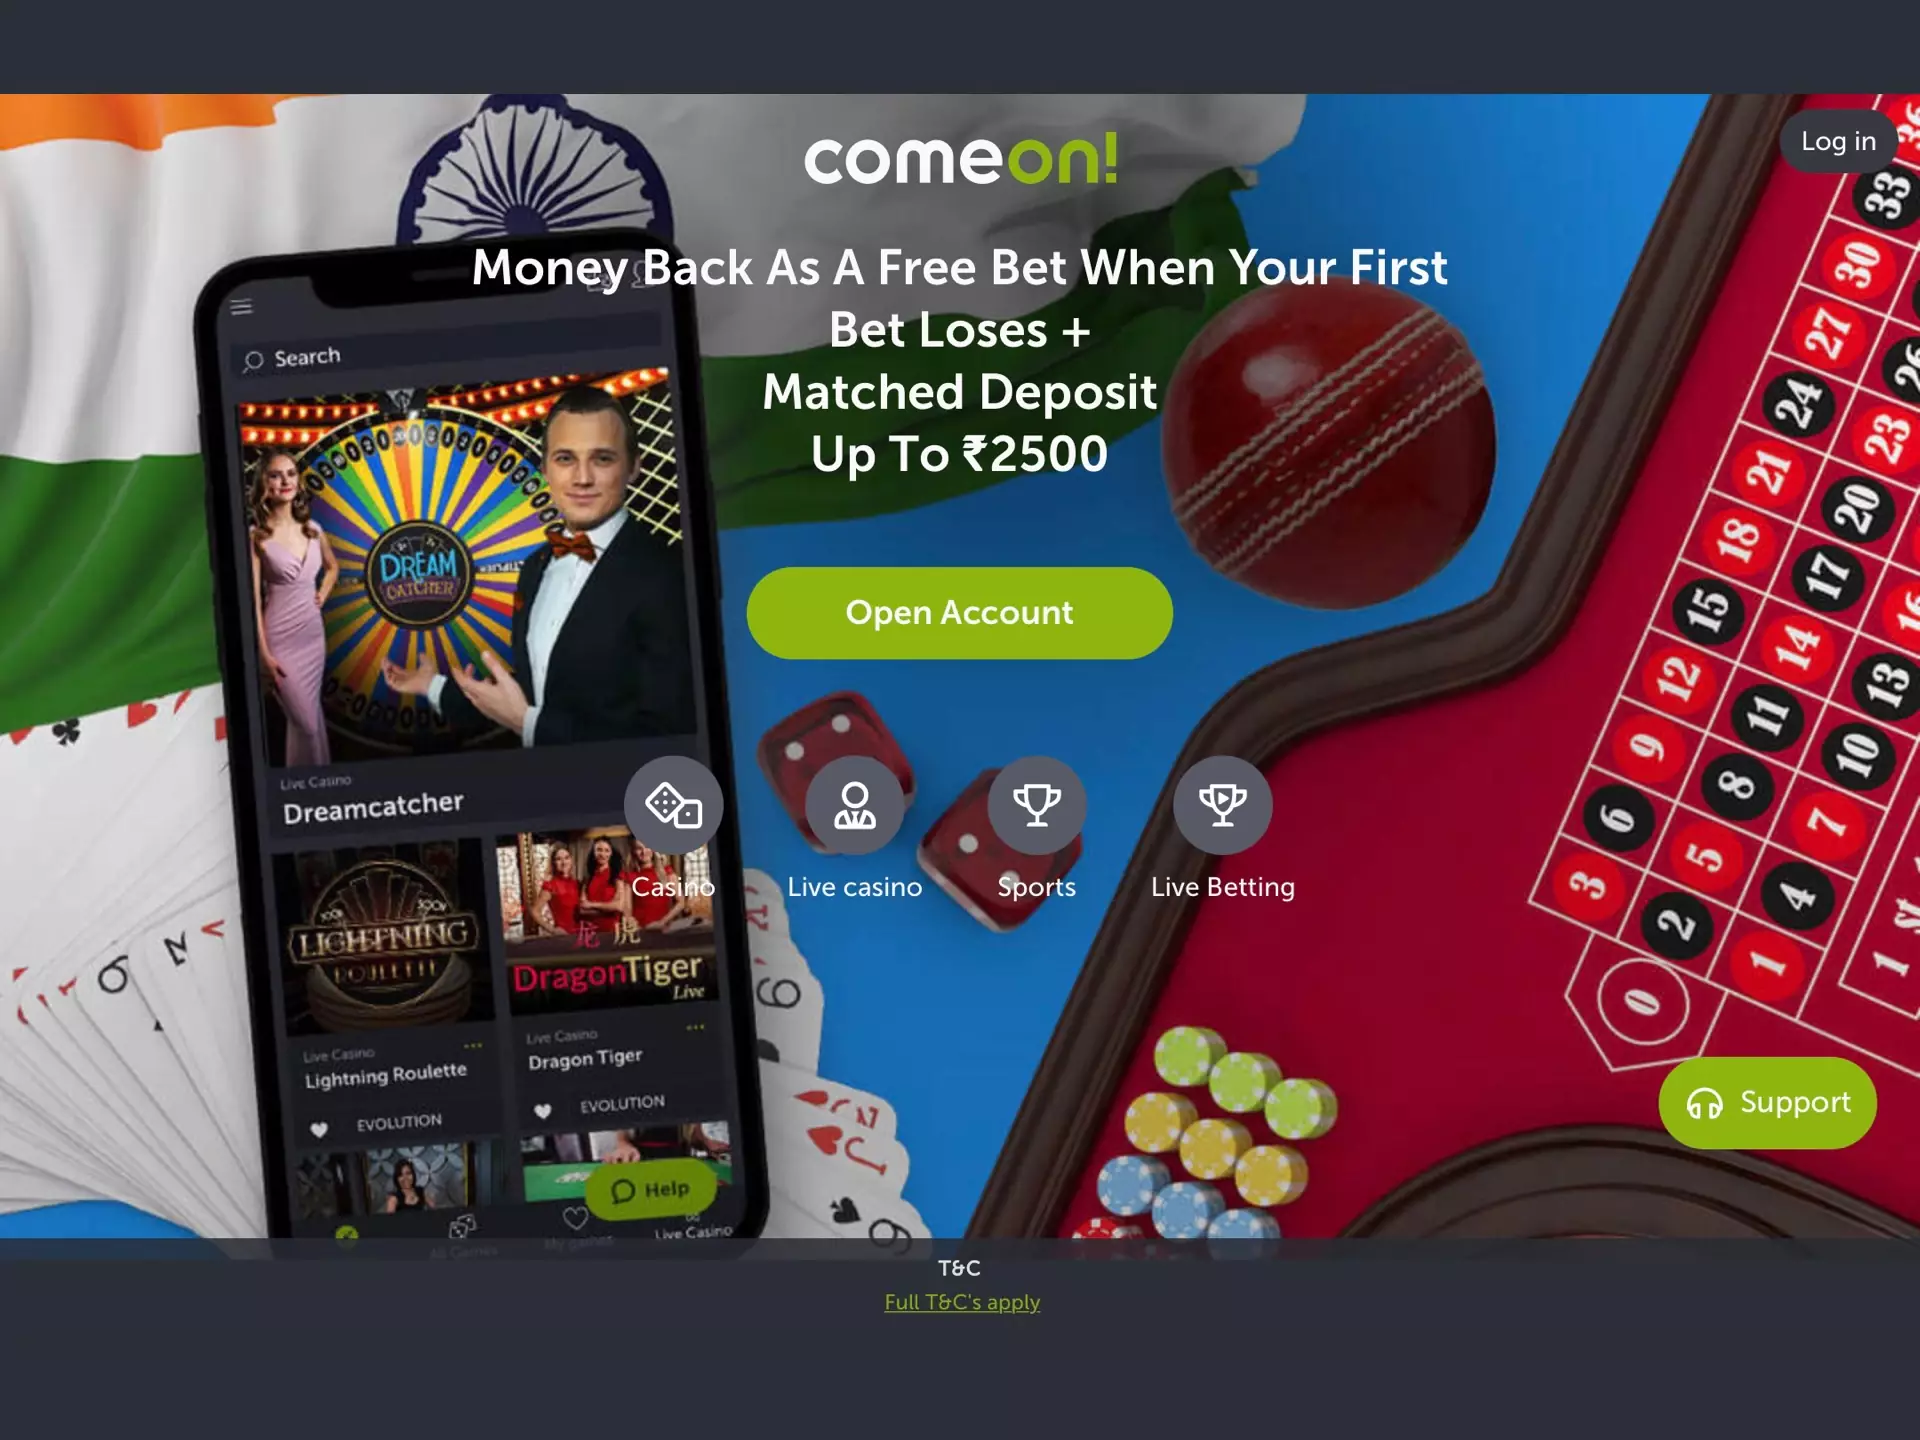 You can choose from thousands games, table games, sports events and enjoy gambling and betting.